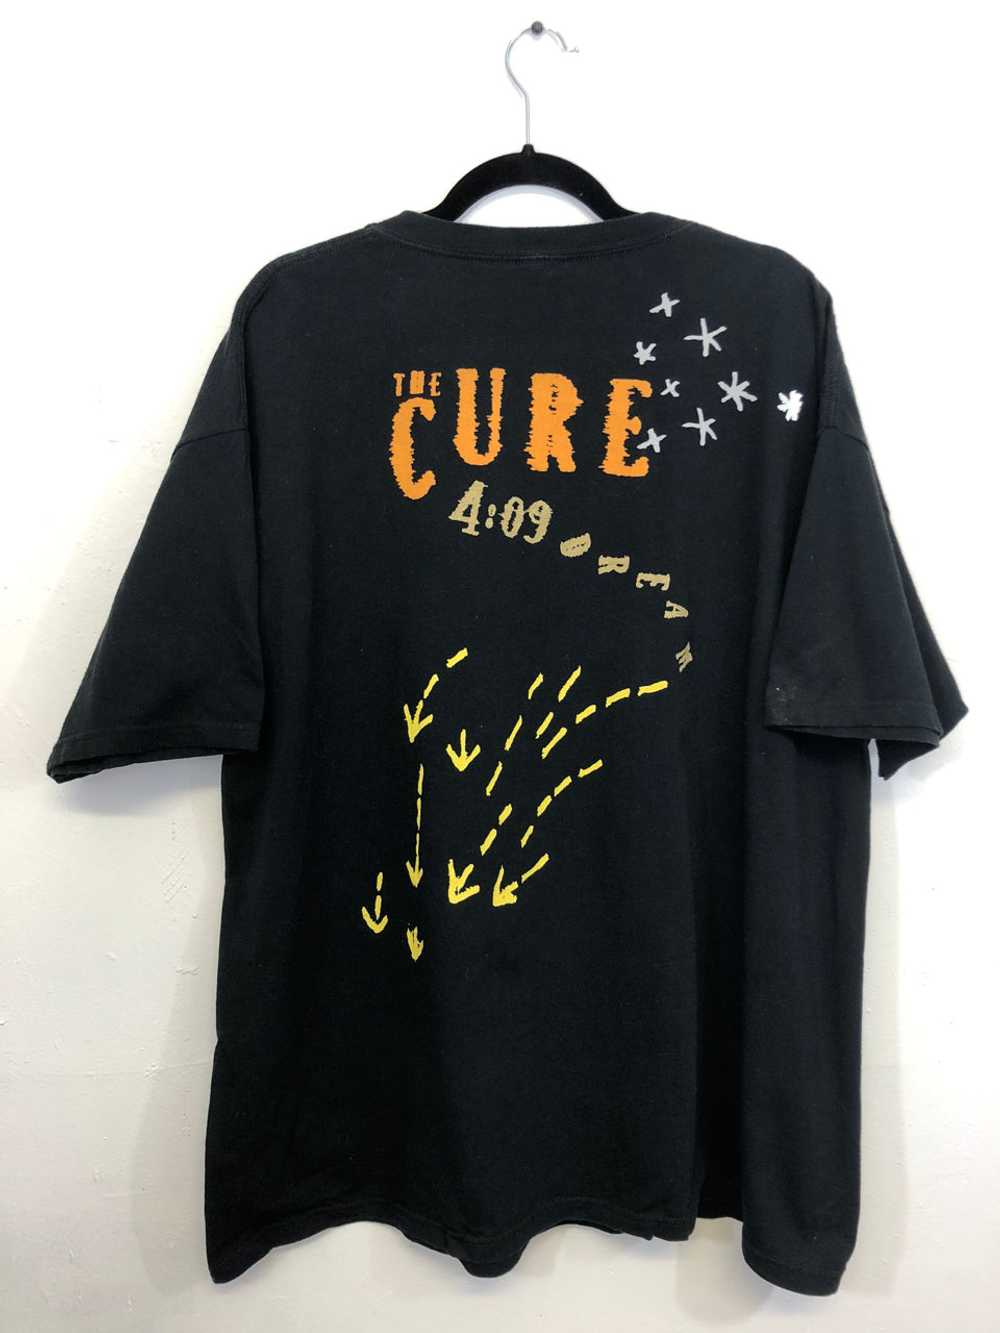 The Cure T-Shirt - image 3